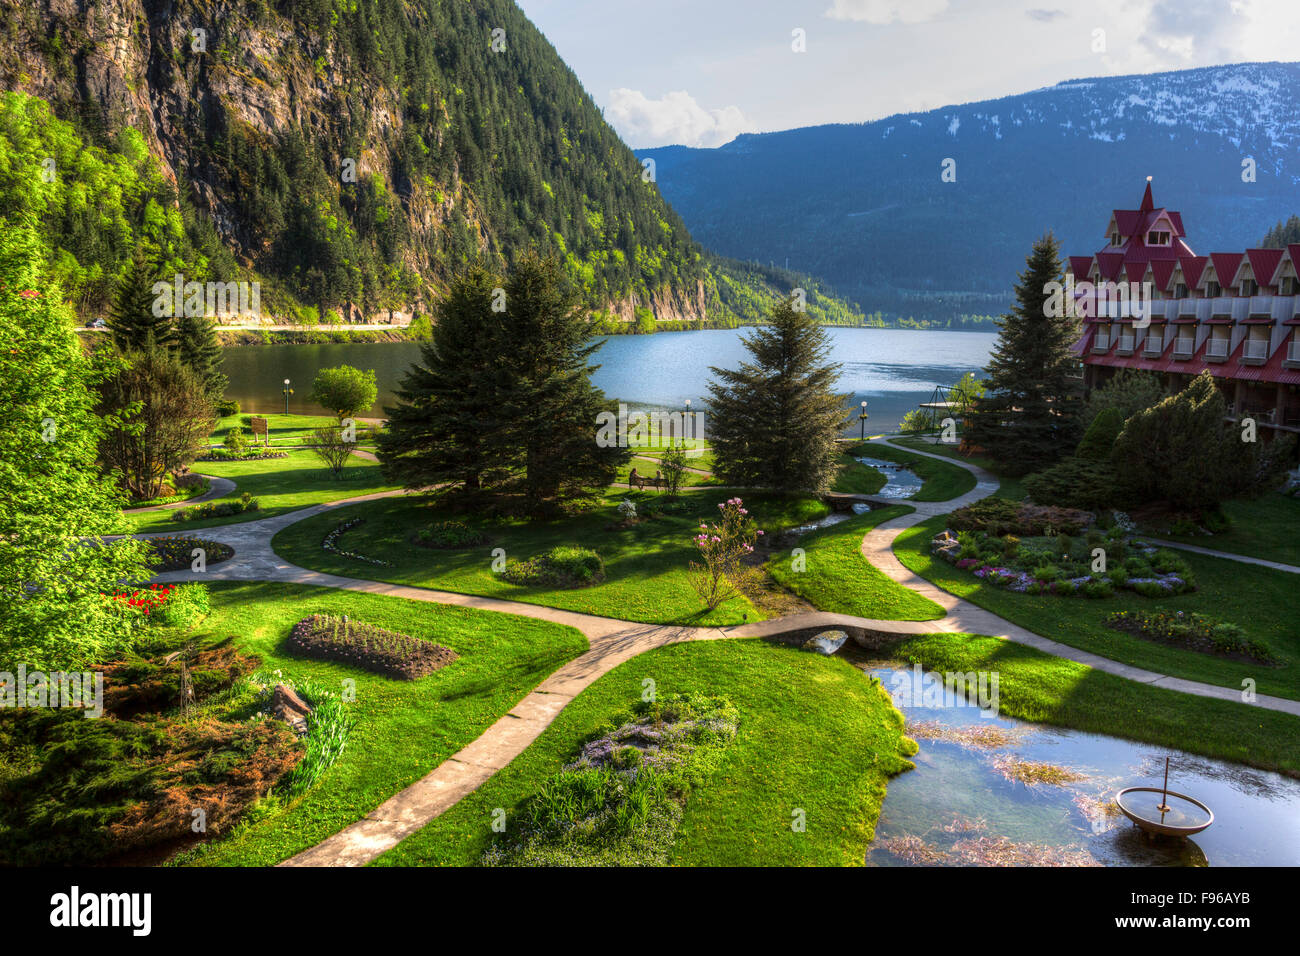 Three Valley Lake Chateau, Revelstoke, British Columbia, Canada Banque D'Images